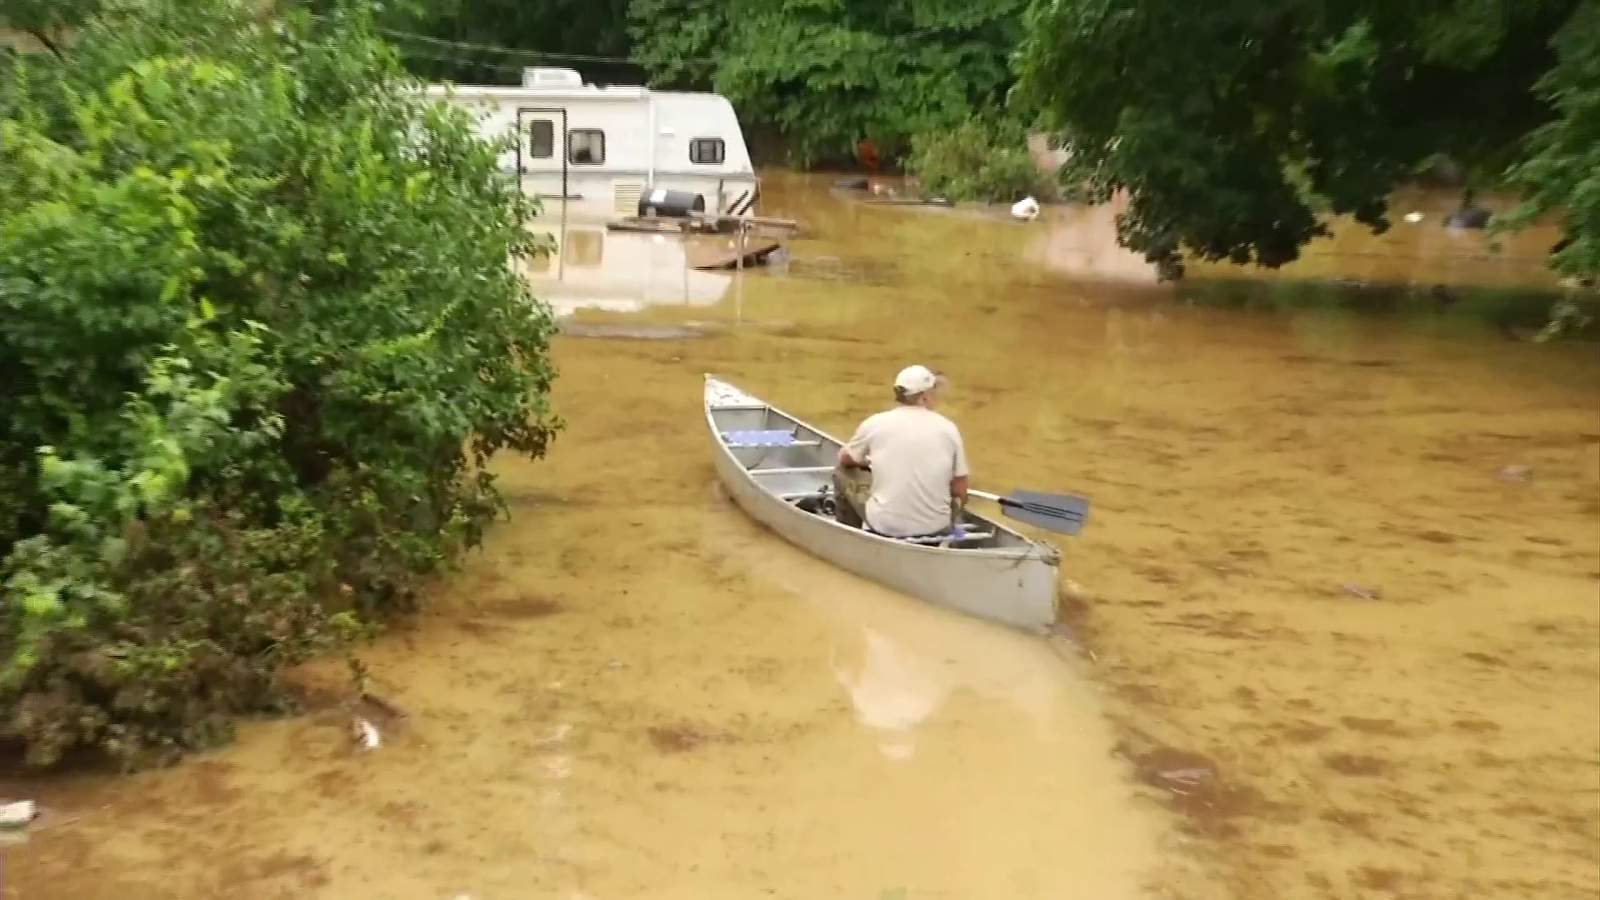 Remembering the 2016 Alleghany County flood this Flood Awareness Week